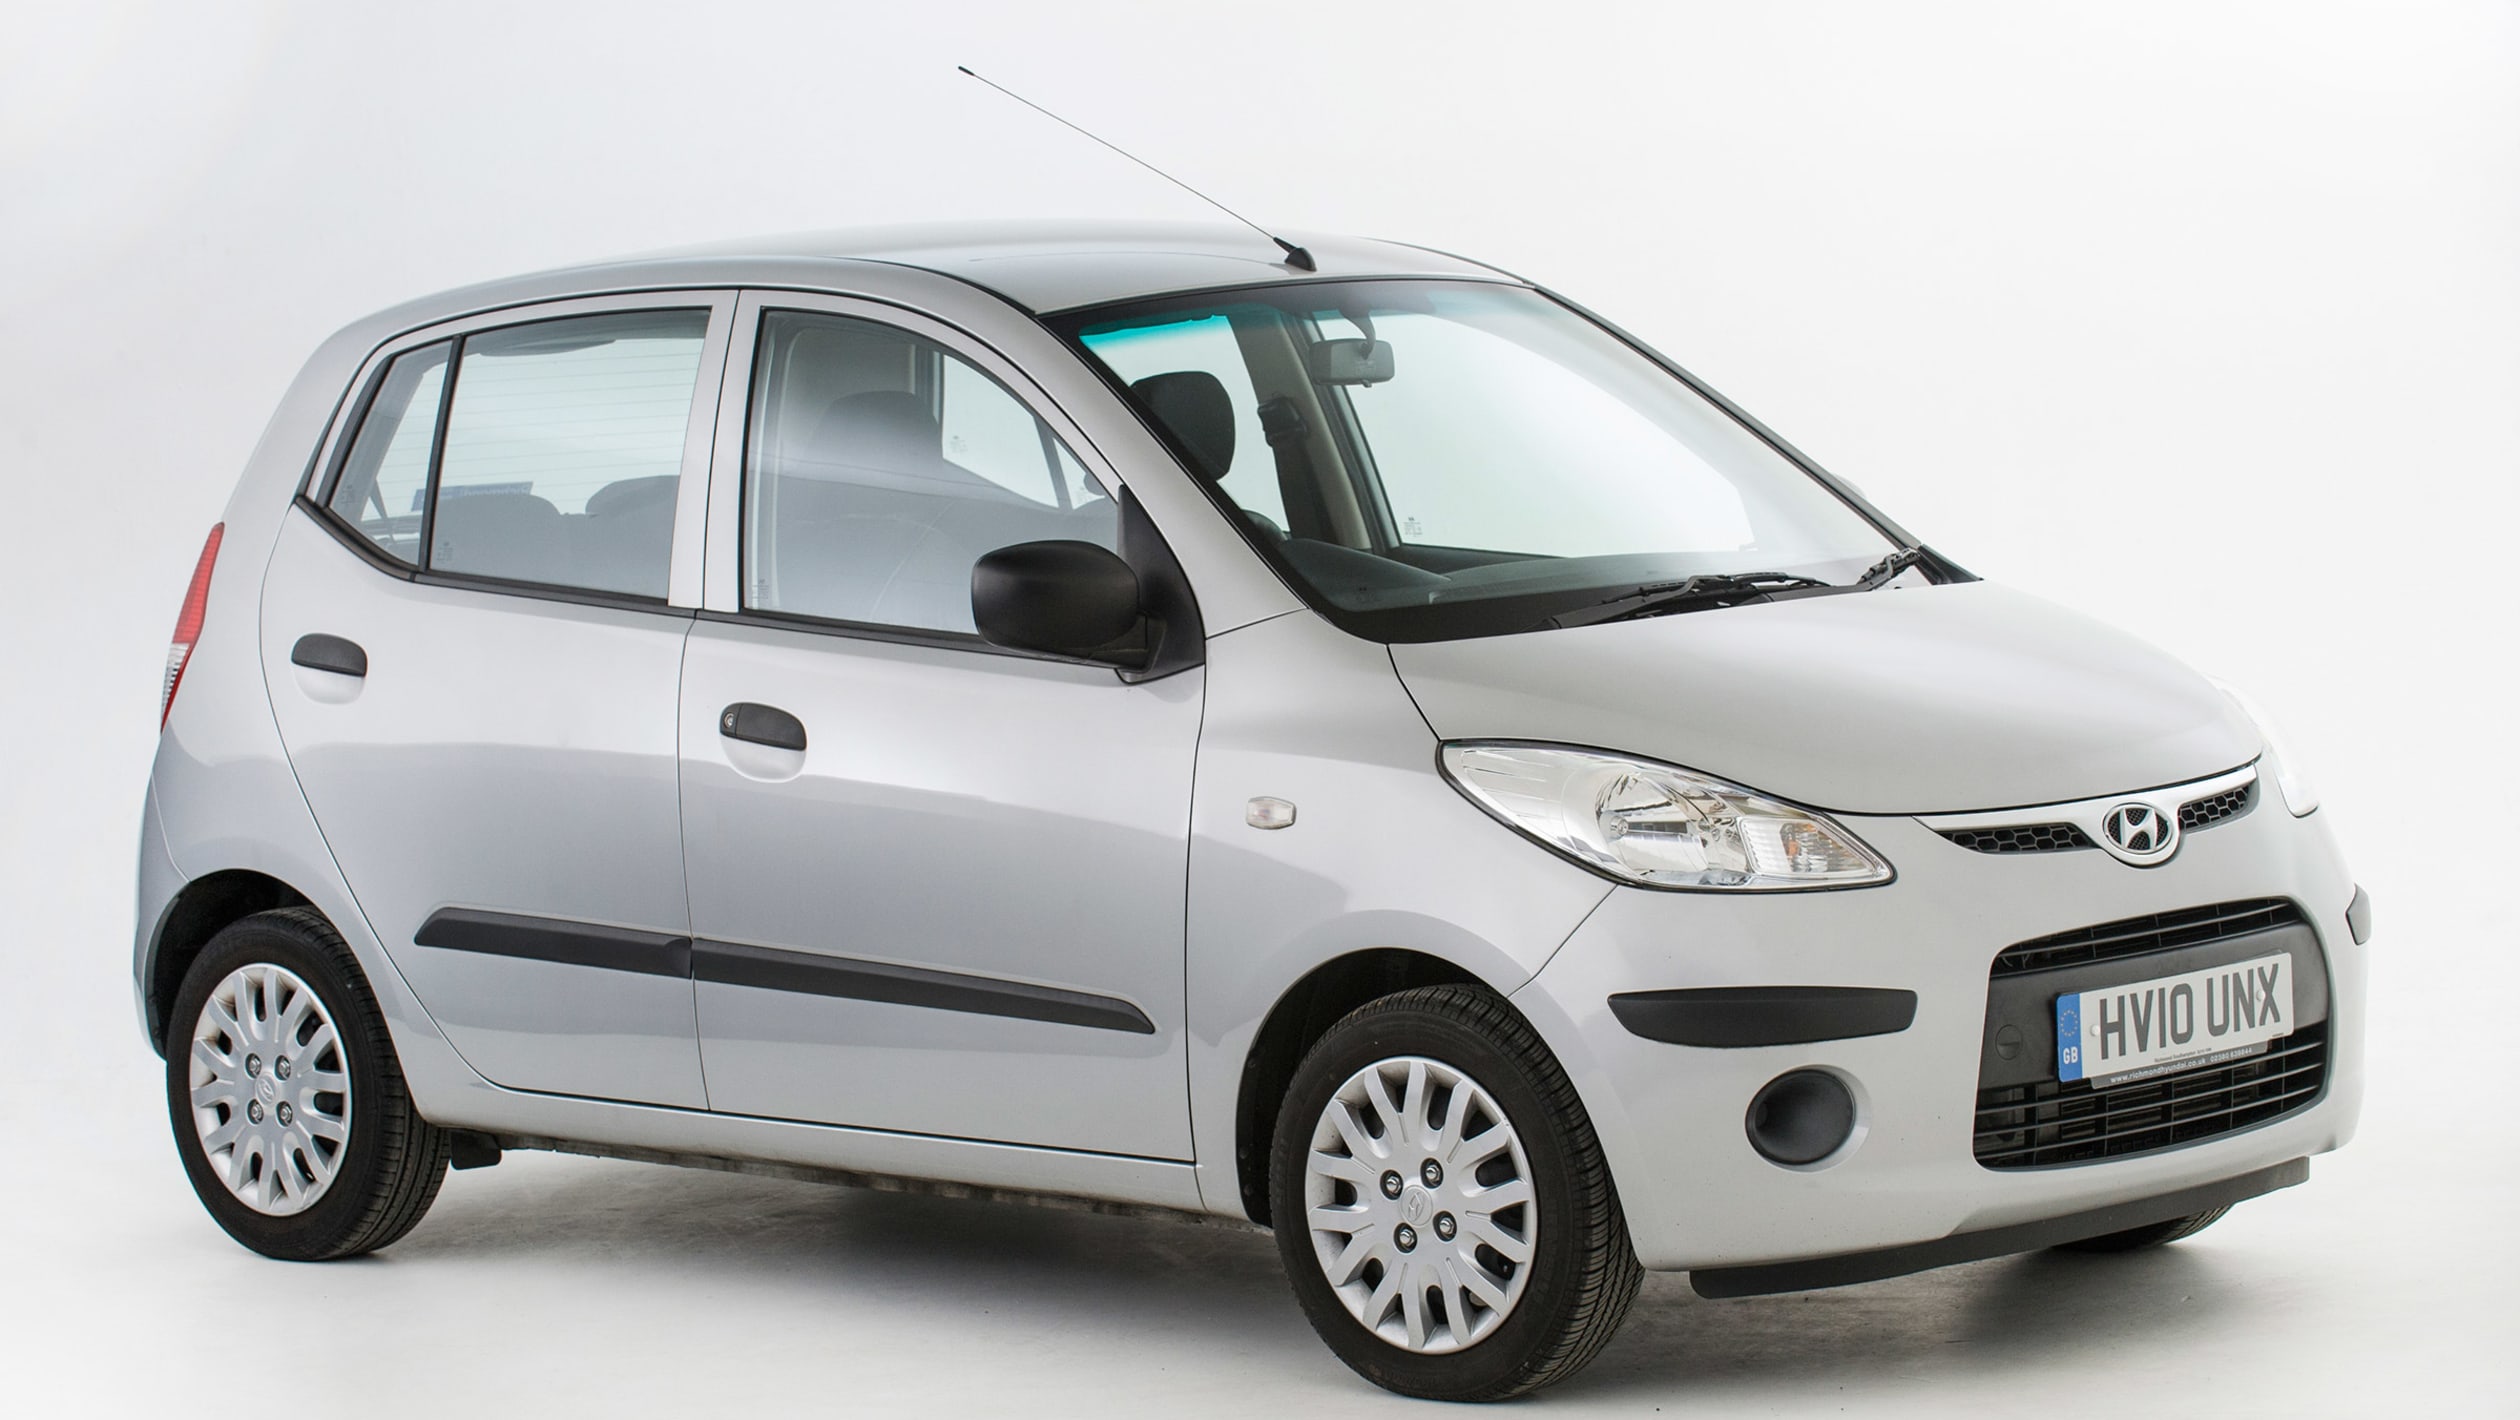 Hyundai i10 hatchback (2010-2013) review | owner reviews: MPG, Problems ...